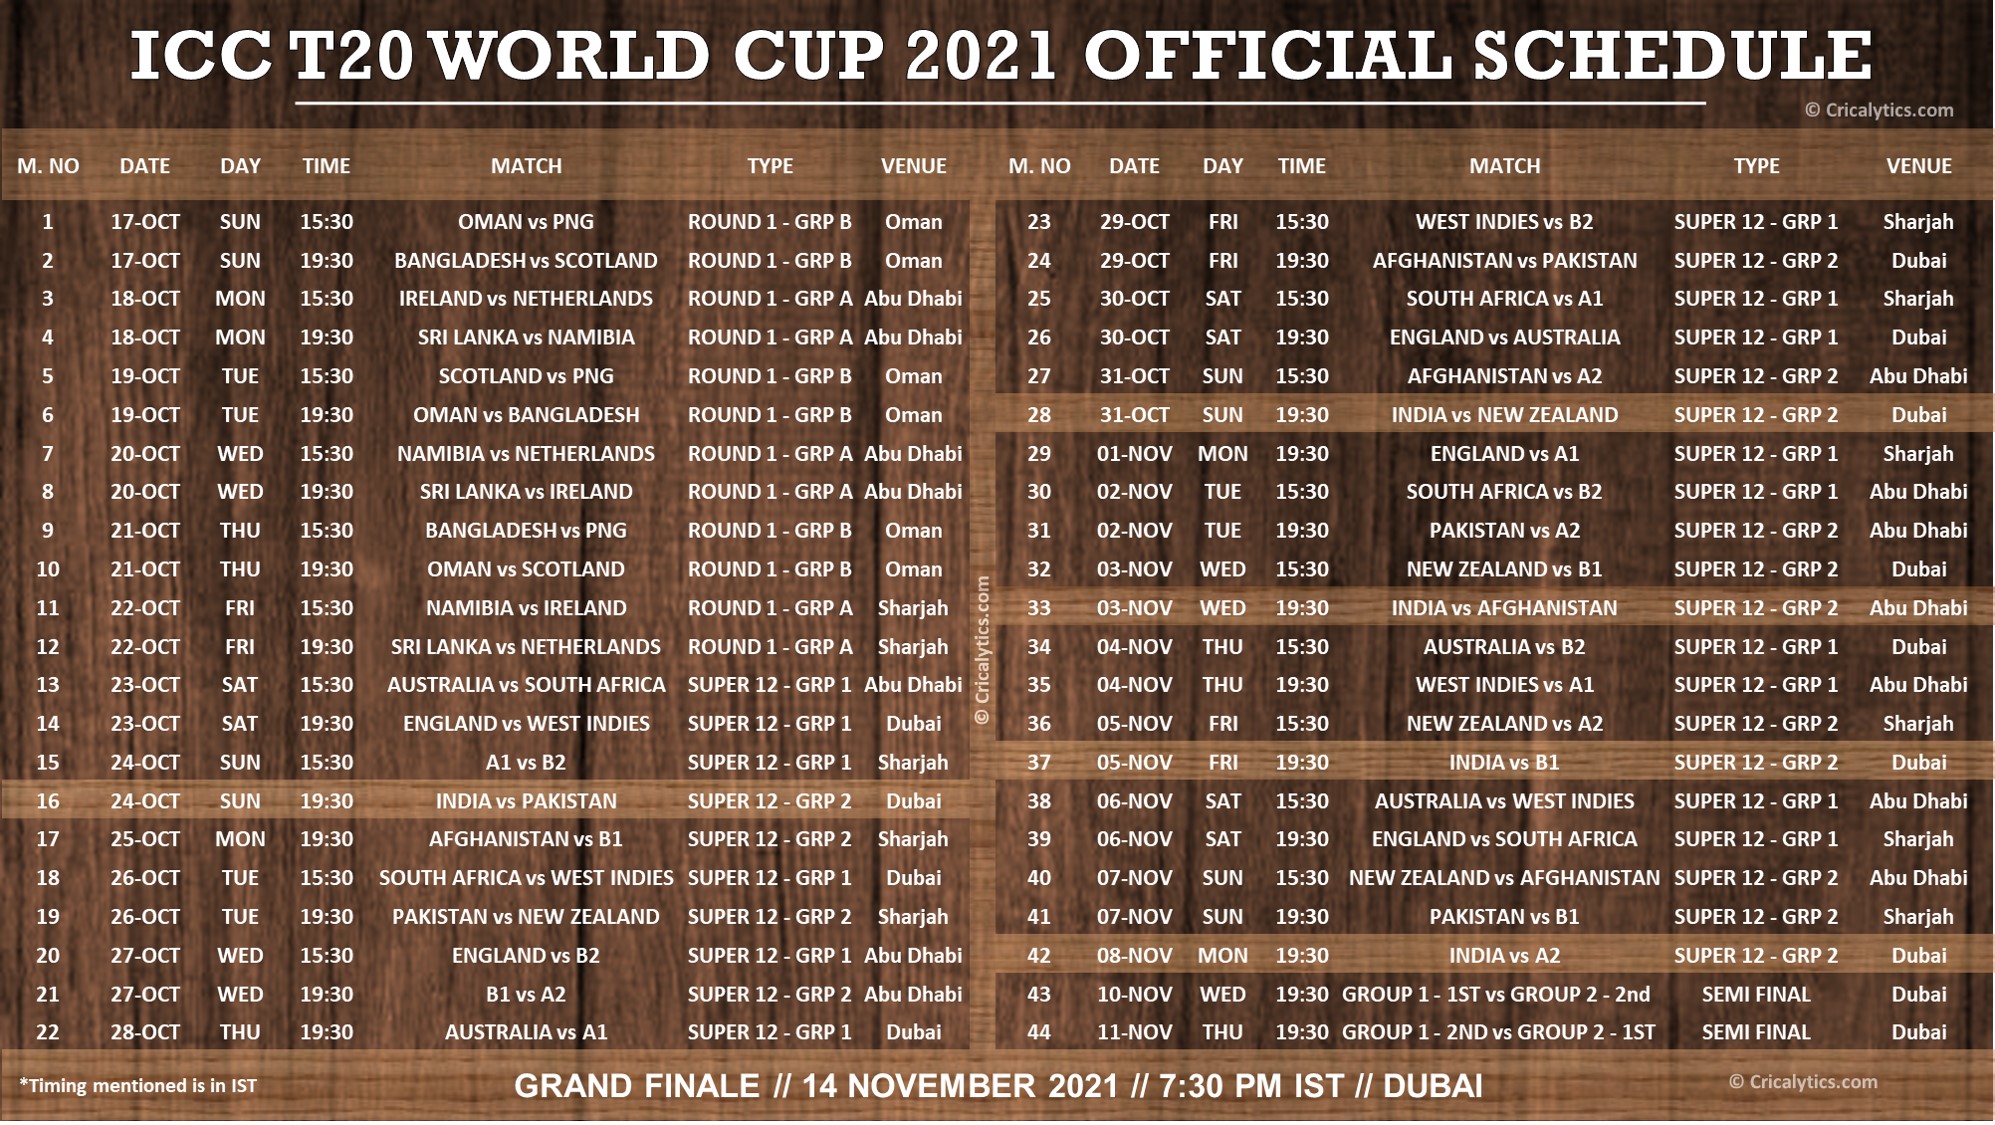 ICC T20 World Cup 2021 Consolidated Official Schedule